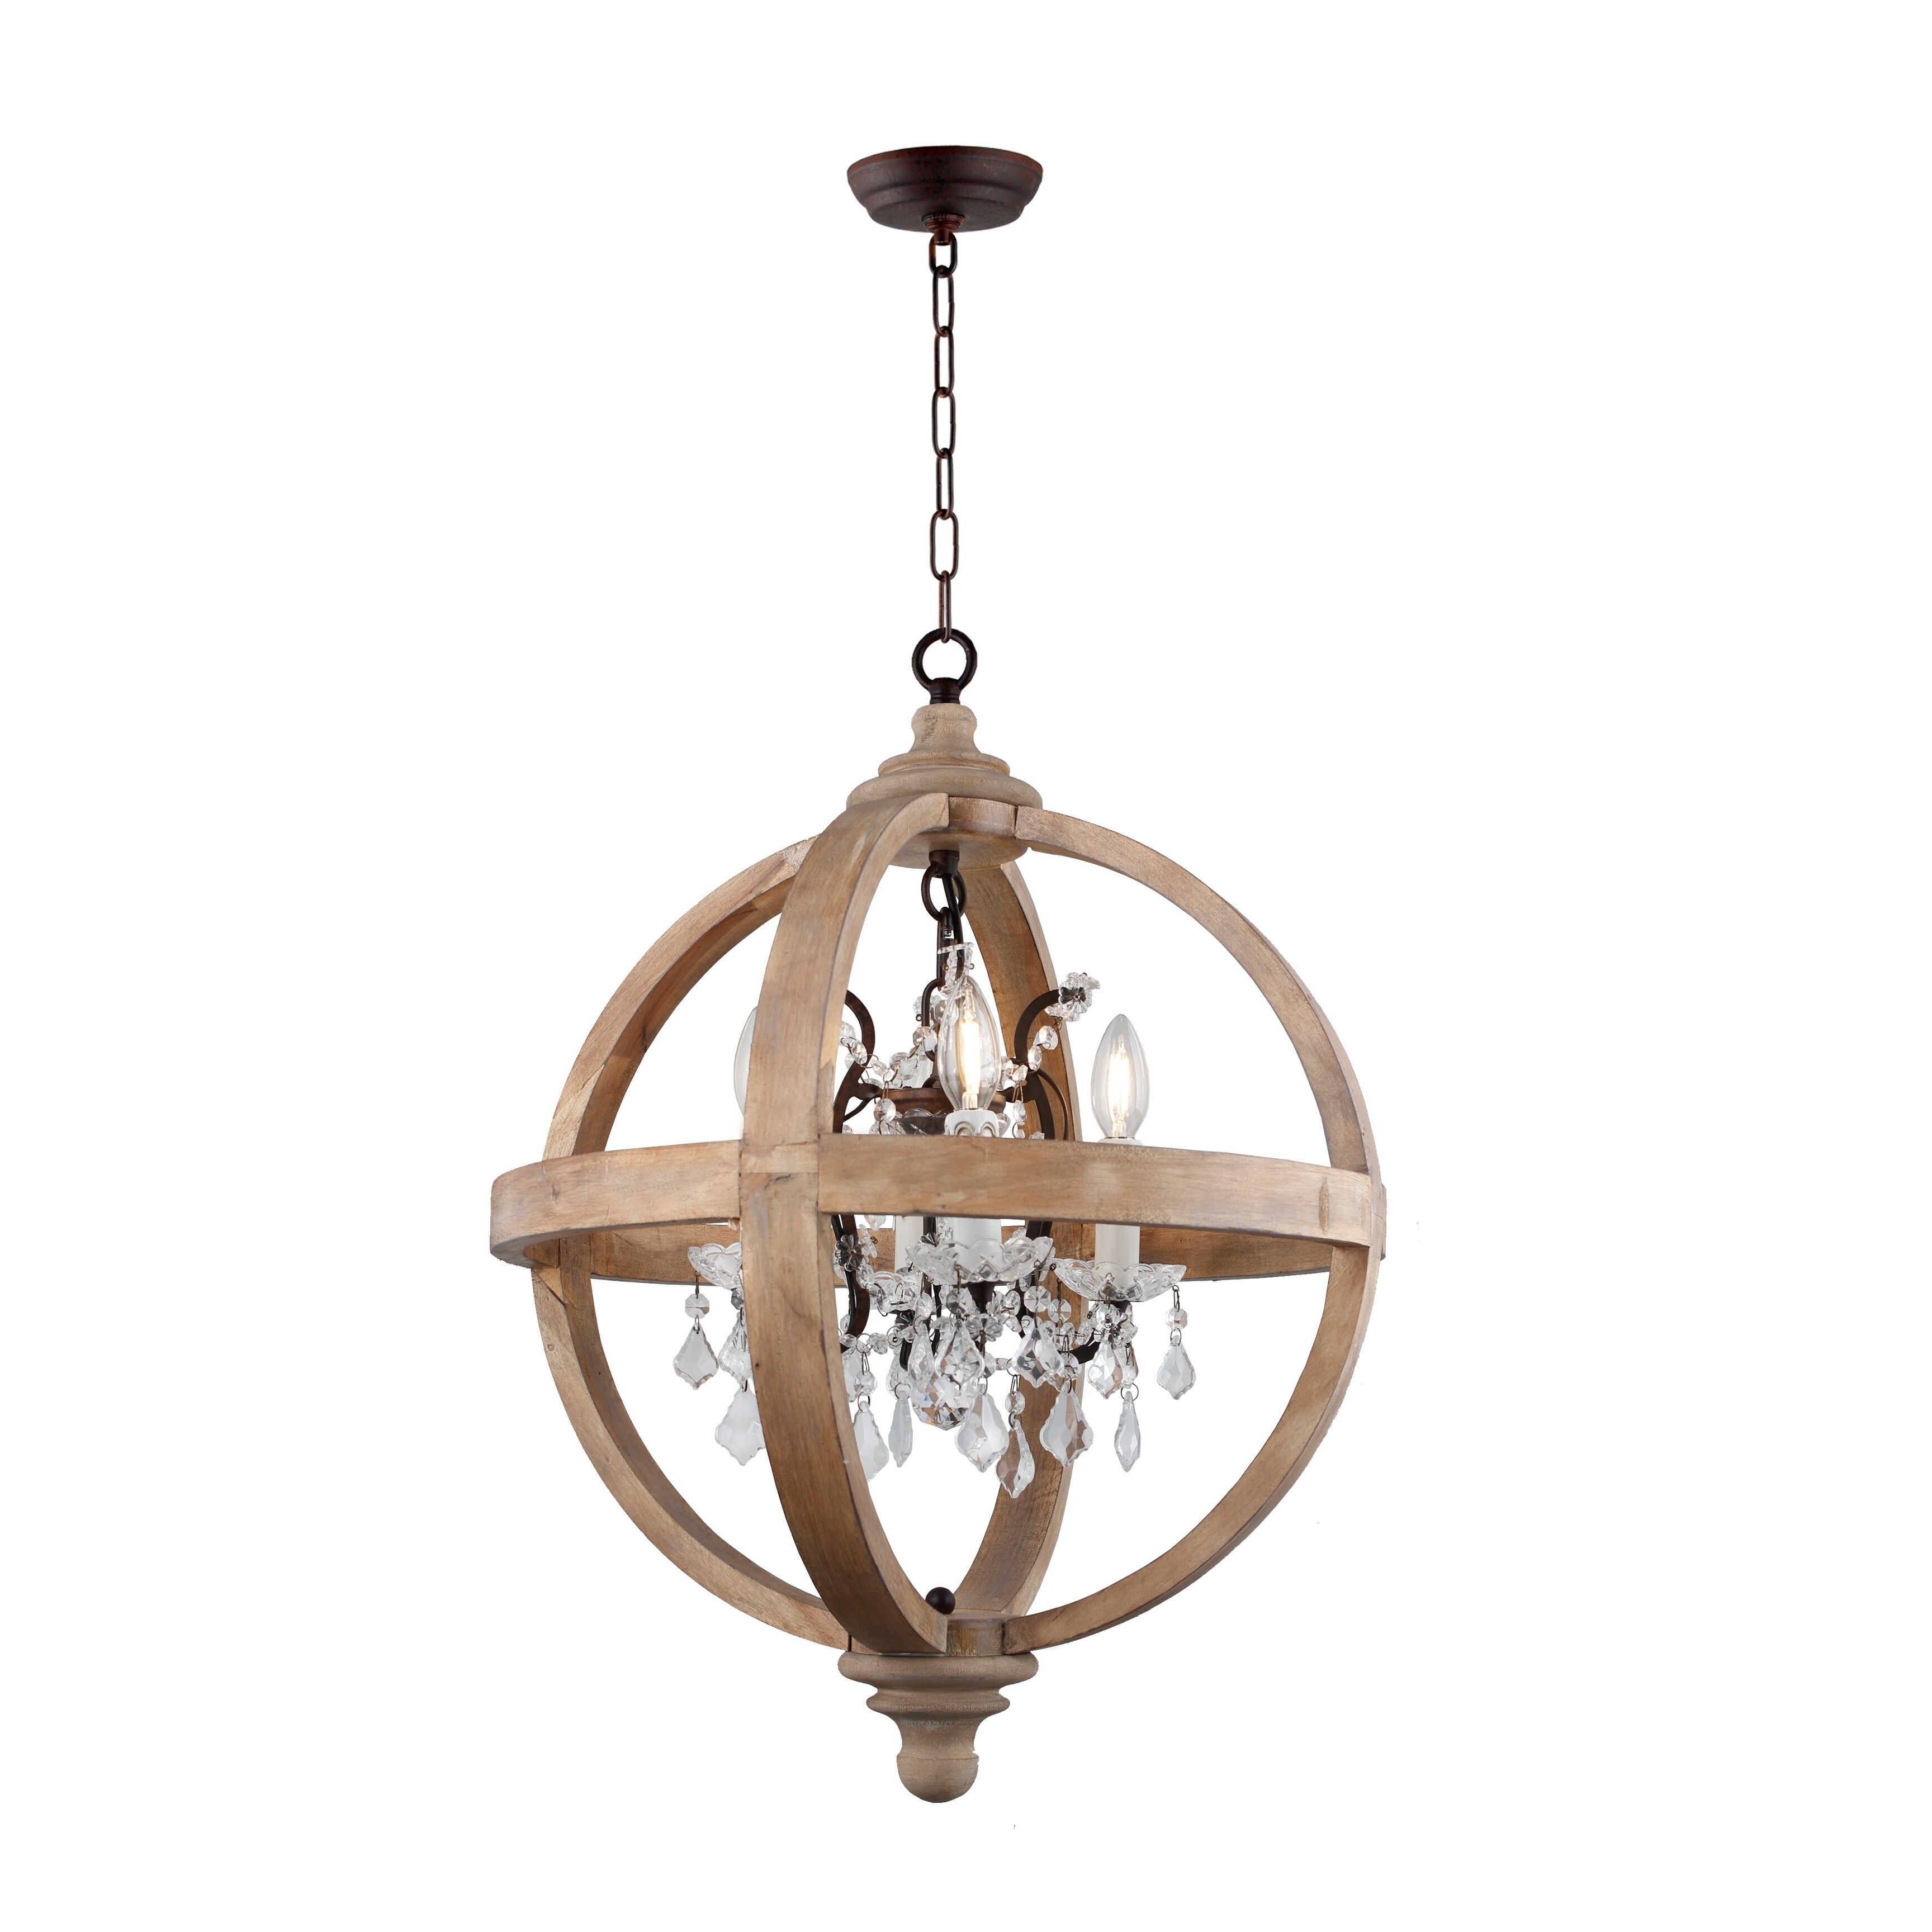 4 Light Candle Style Globe Chandelier in Natural wood N/A ...